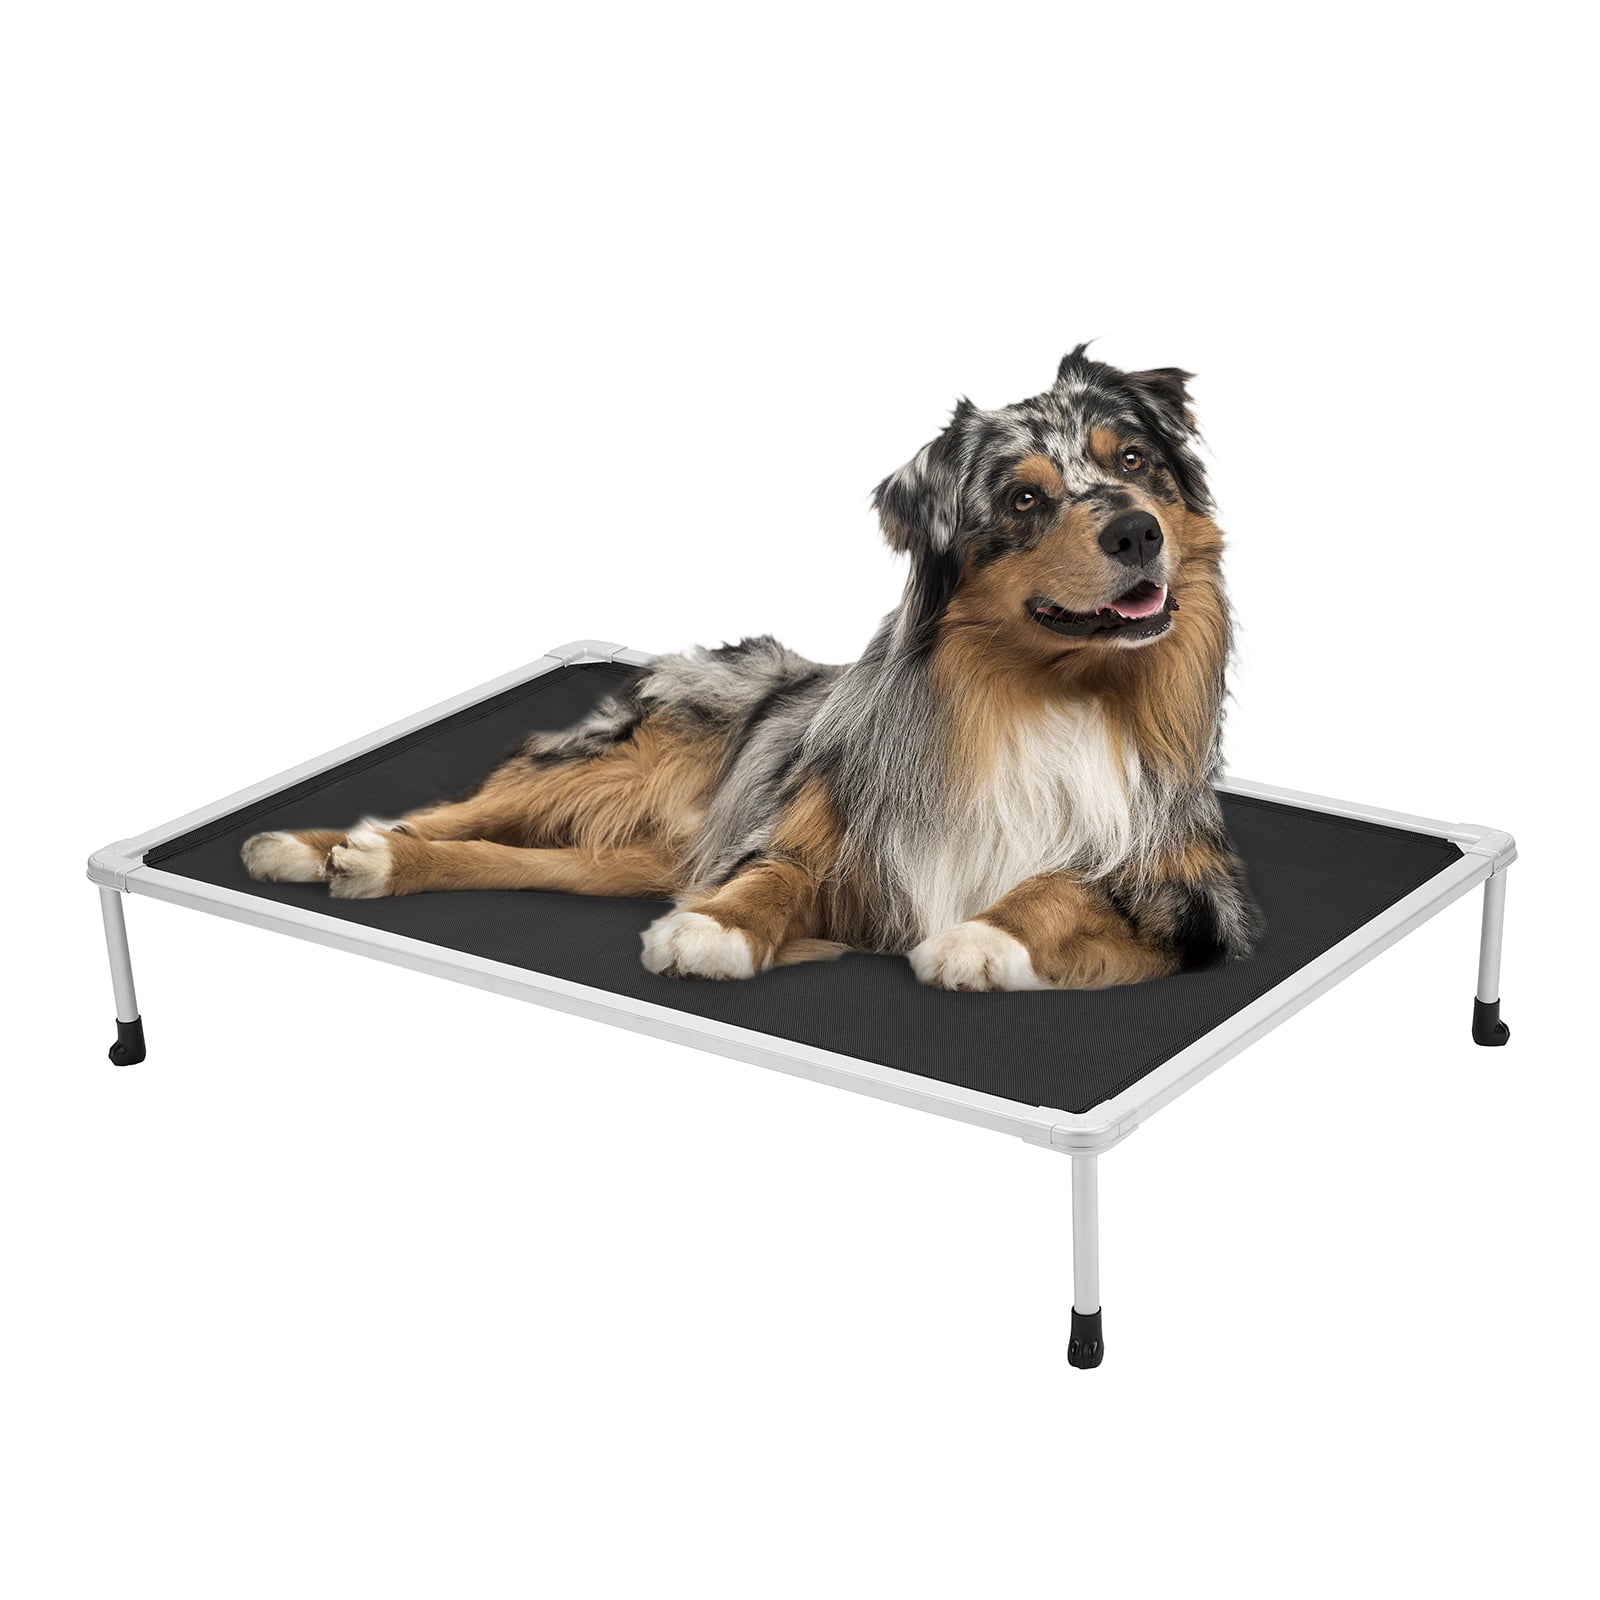 Veehoo Chewproof Dog Bed， Cooling Raised Dog Cots with Silver Metal Frame， Medium， Black